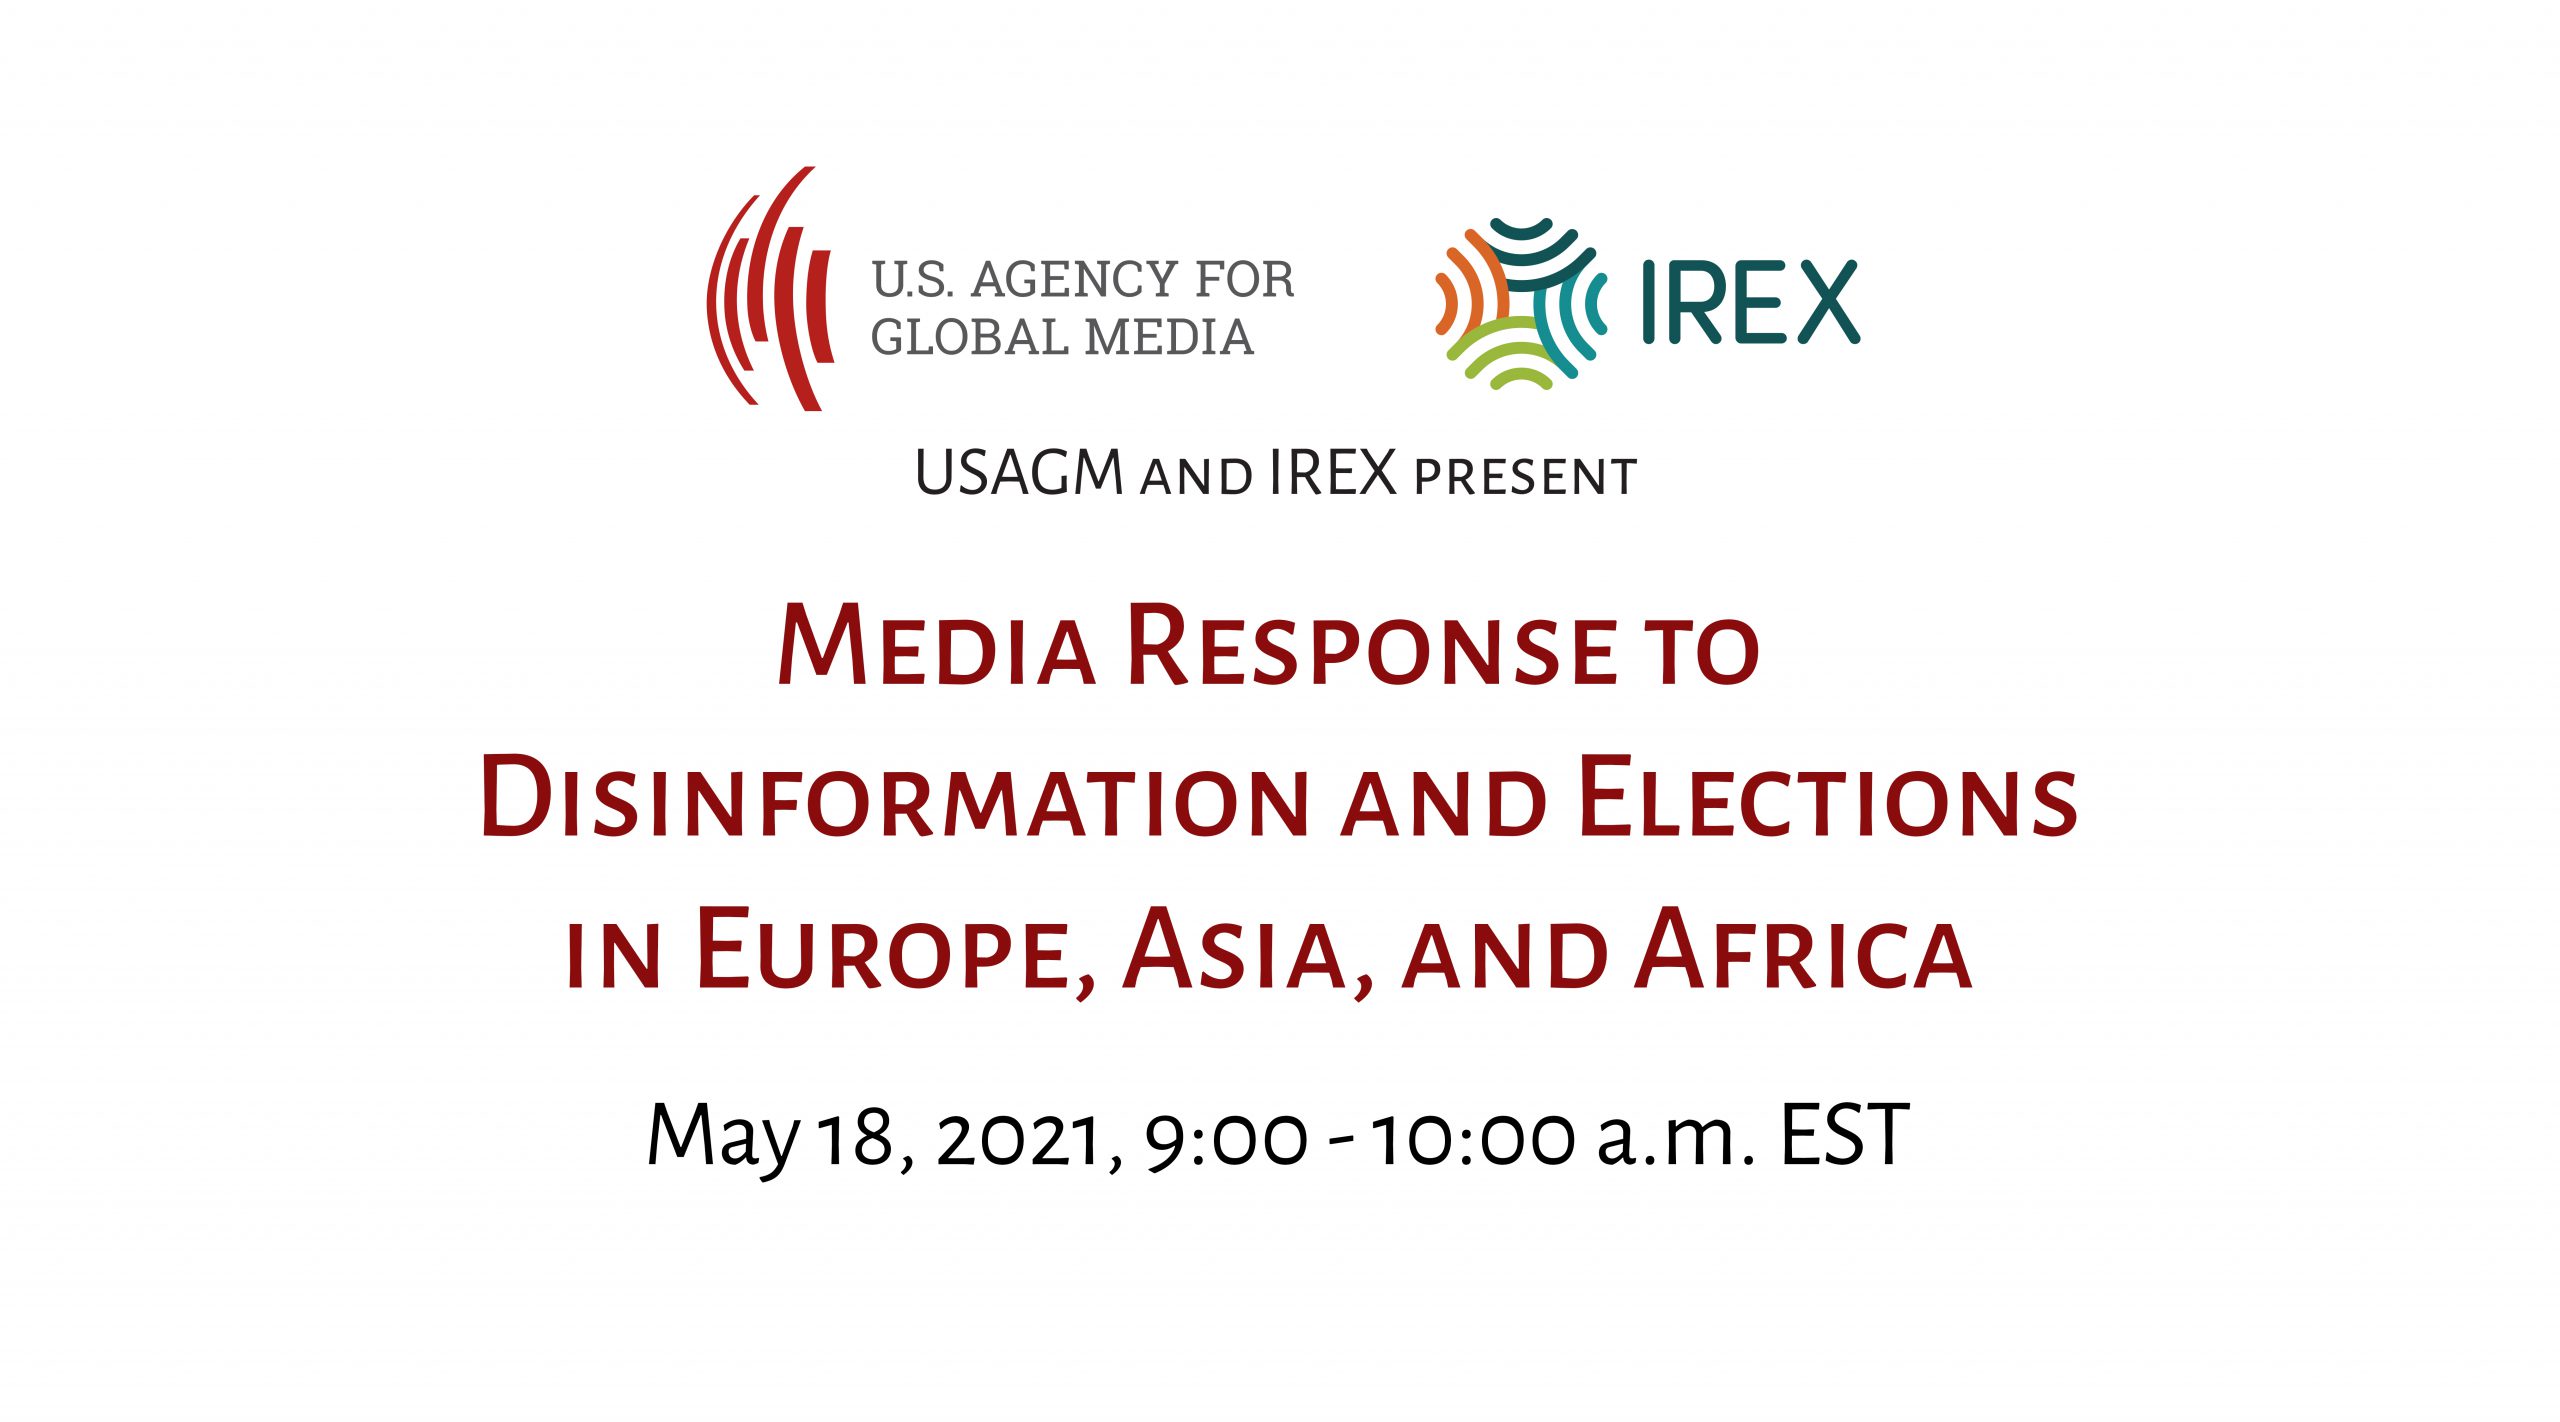 Media response to disinformation and elections in Europe, Asia and Africa